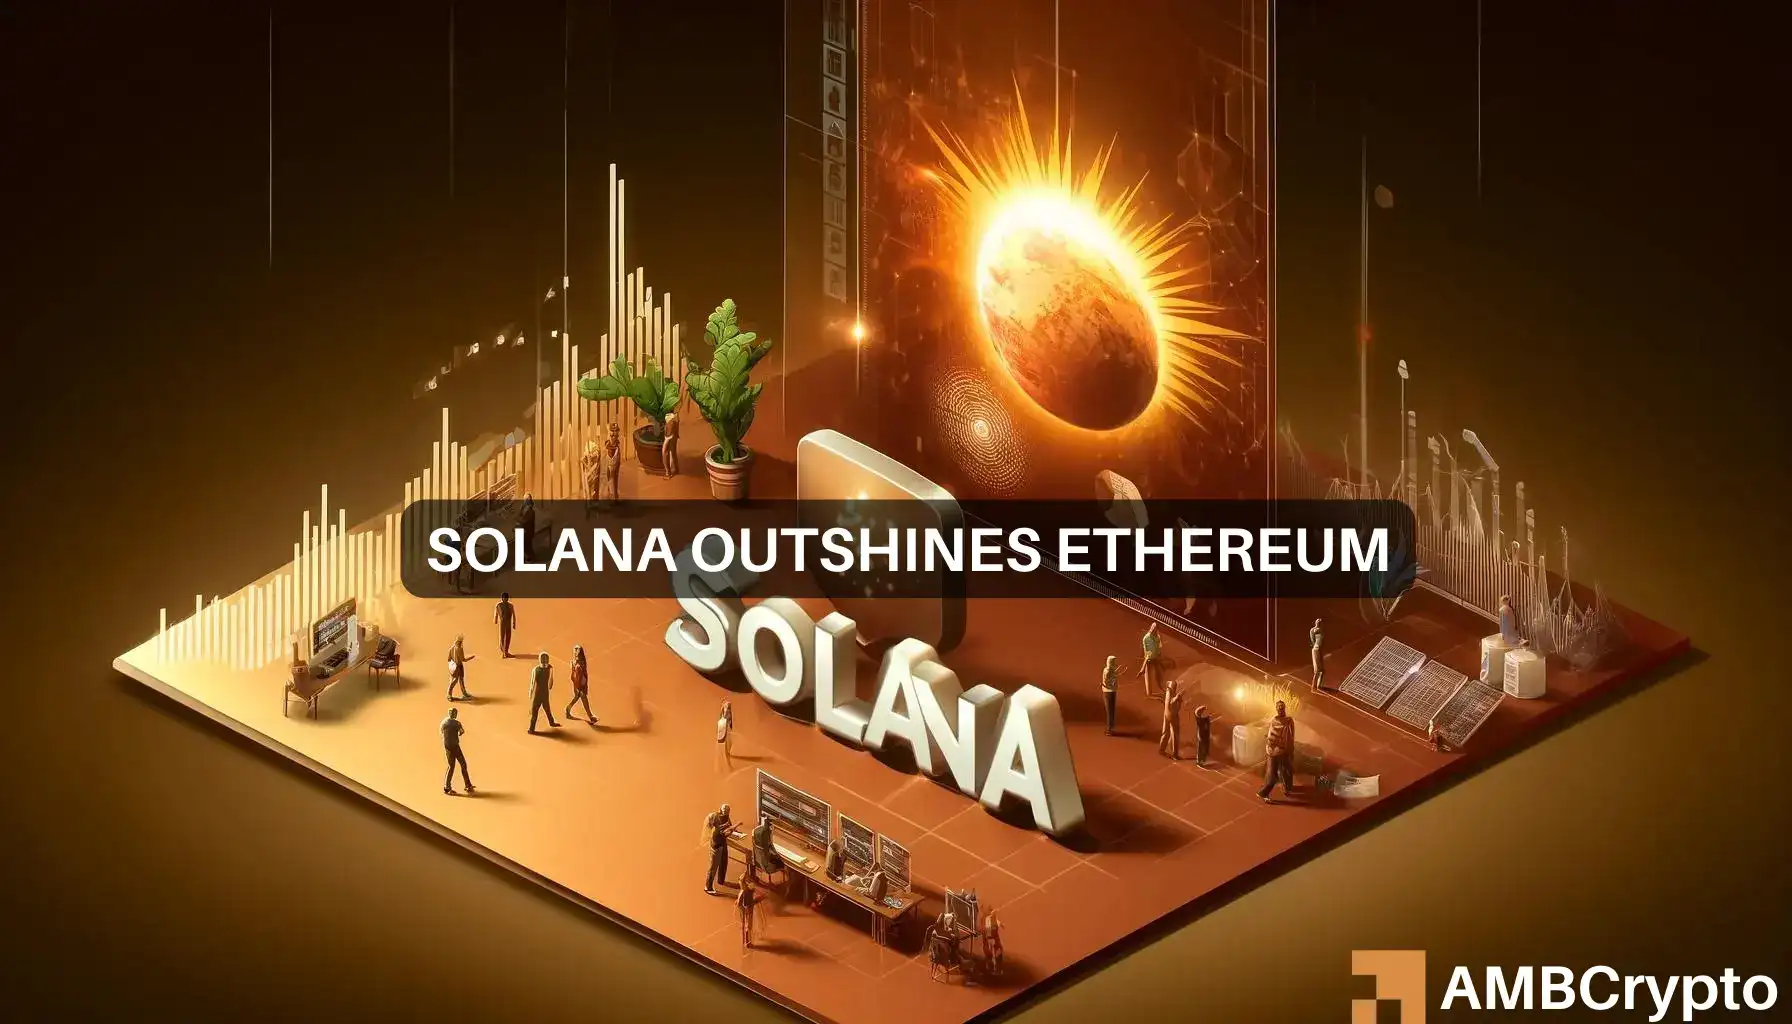 Solana tops Bitcoin, Ethereum in NFTs, but should SOL prices worry you?